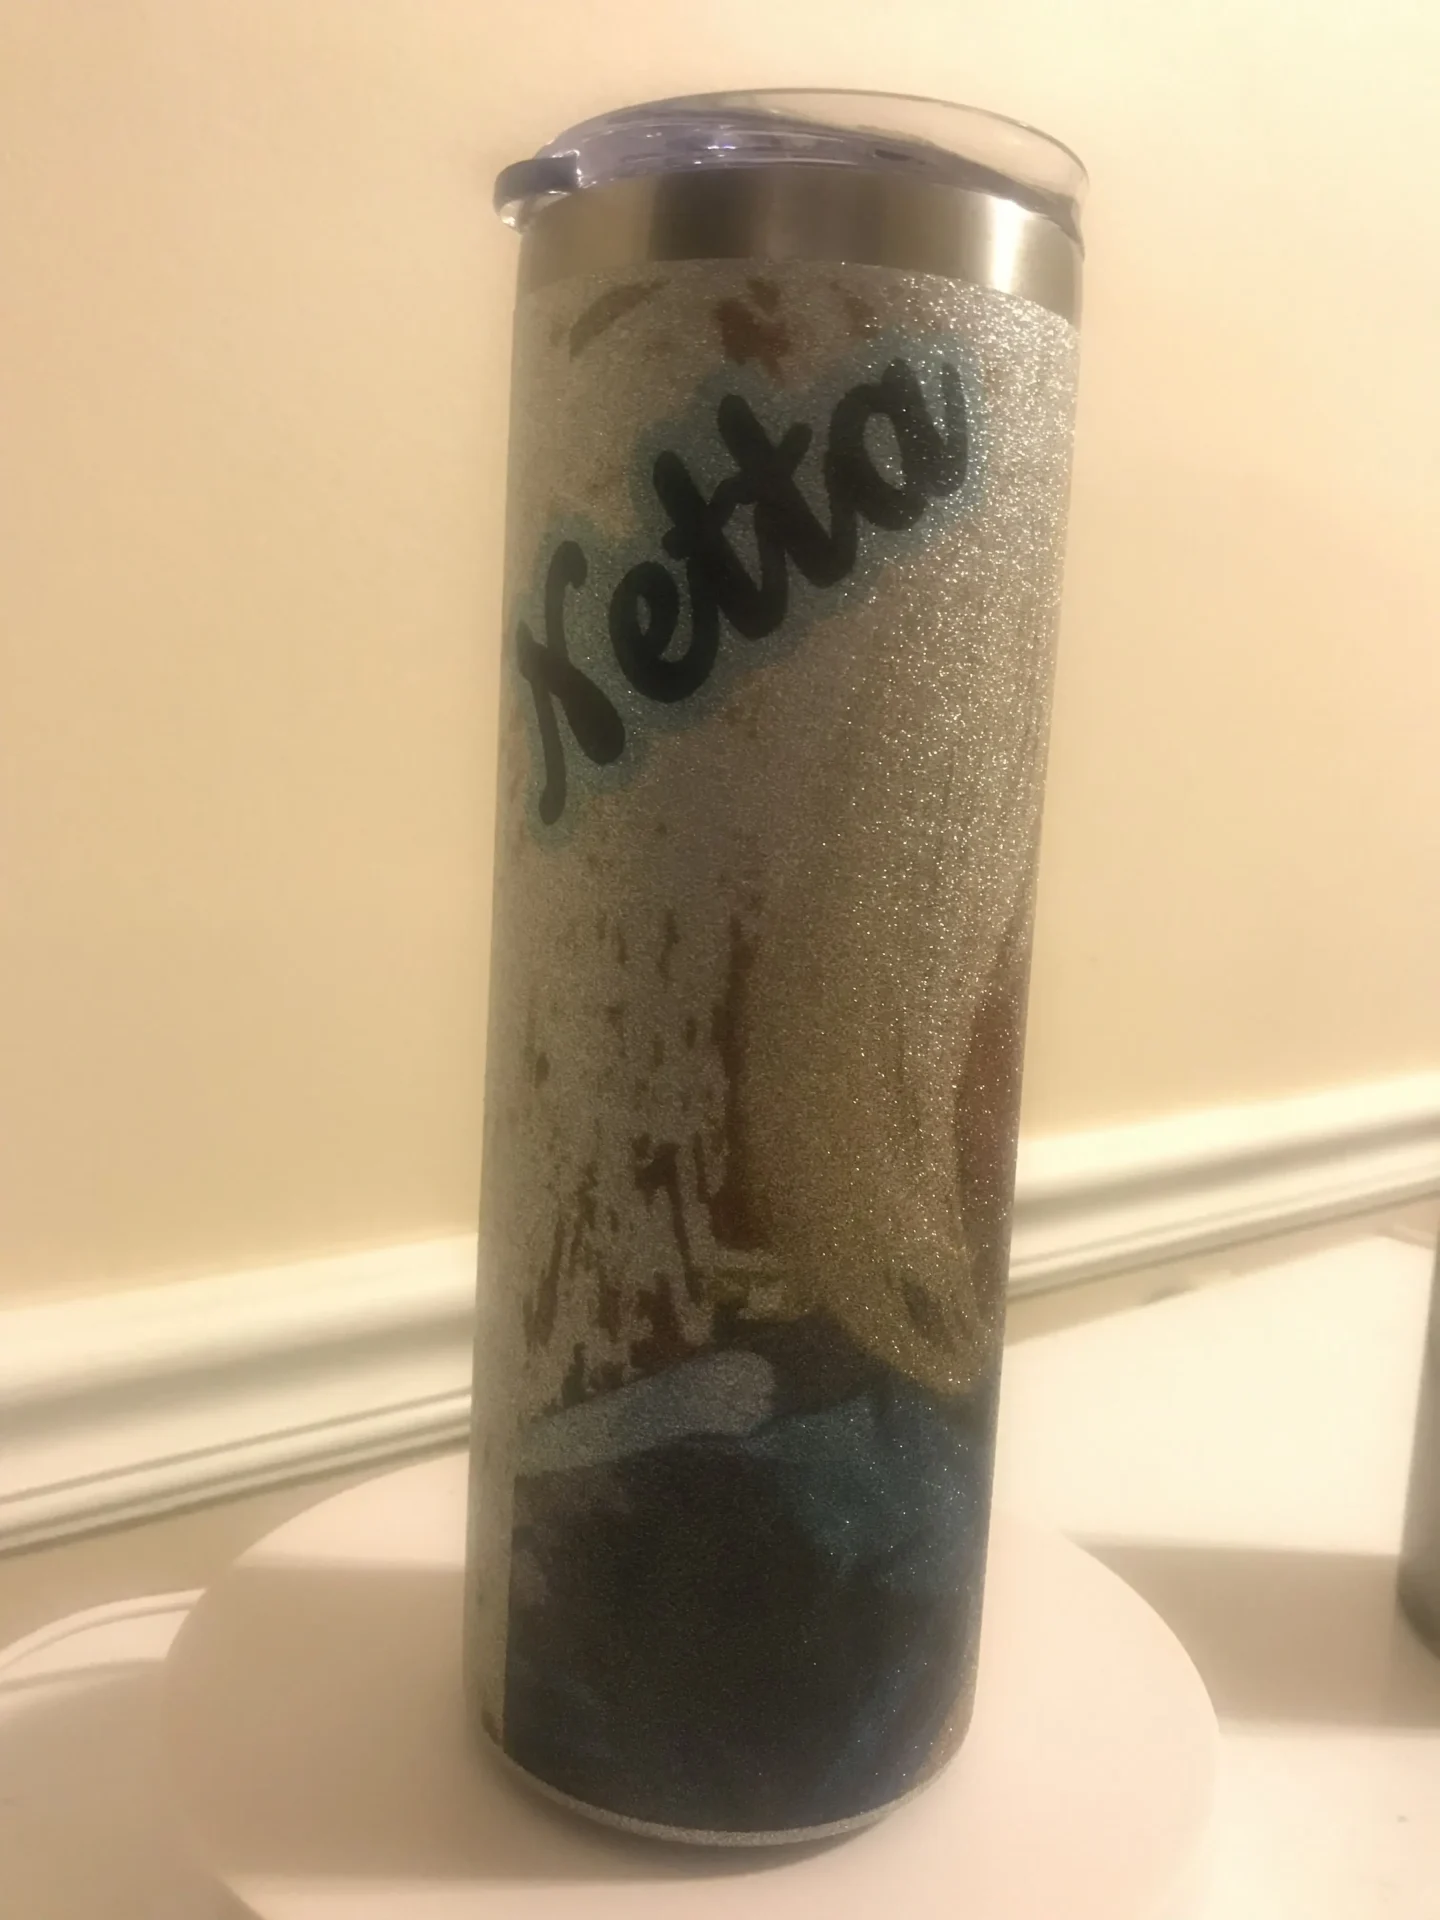 A tall glass with some type of liquid inside